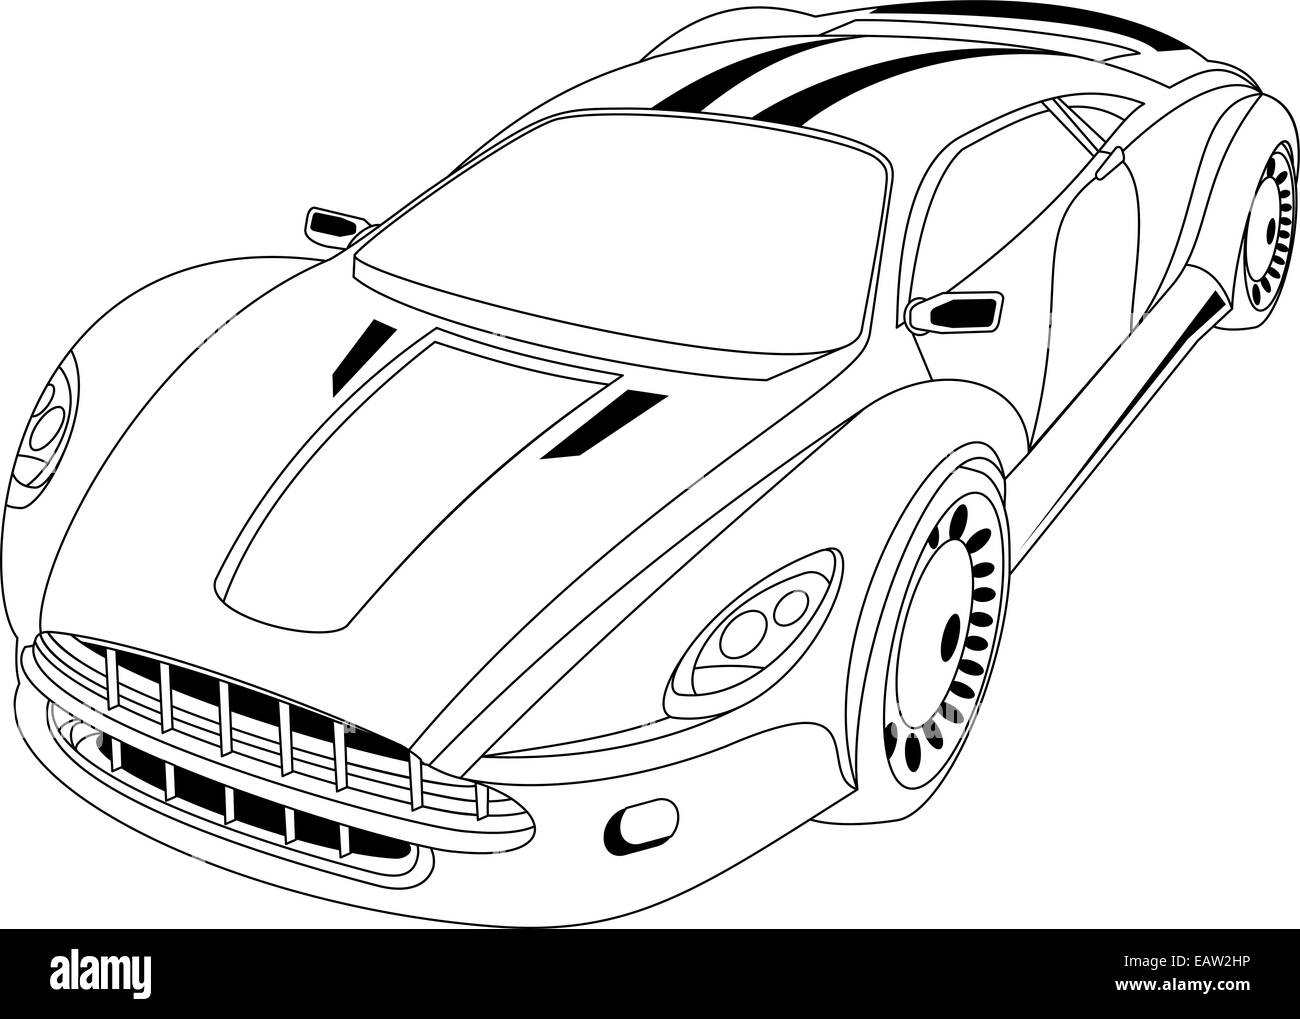 Concept car sketch Black and White Stock Photos & Images - Alamy